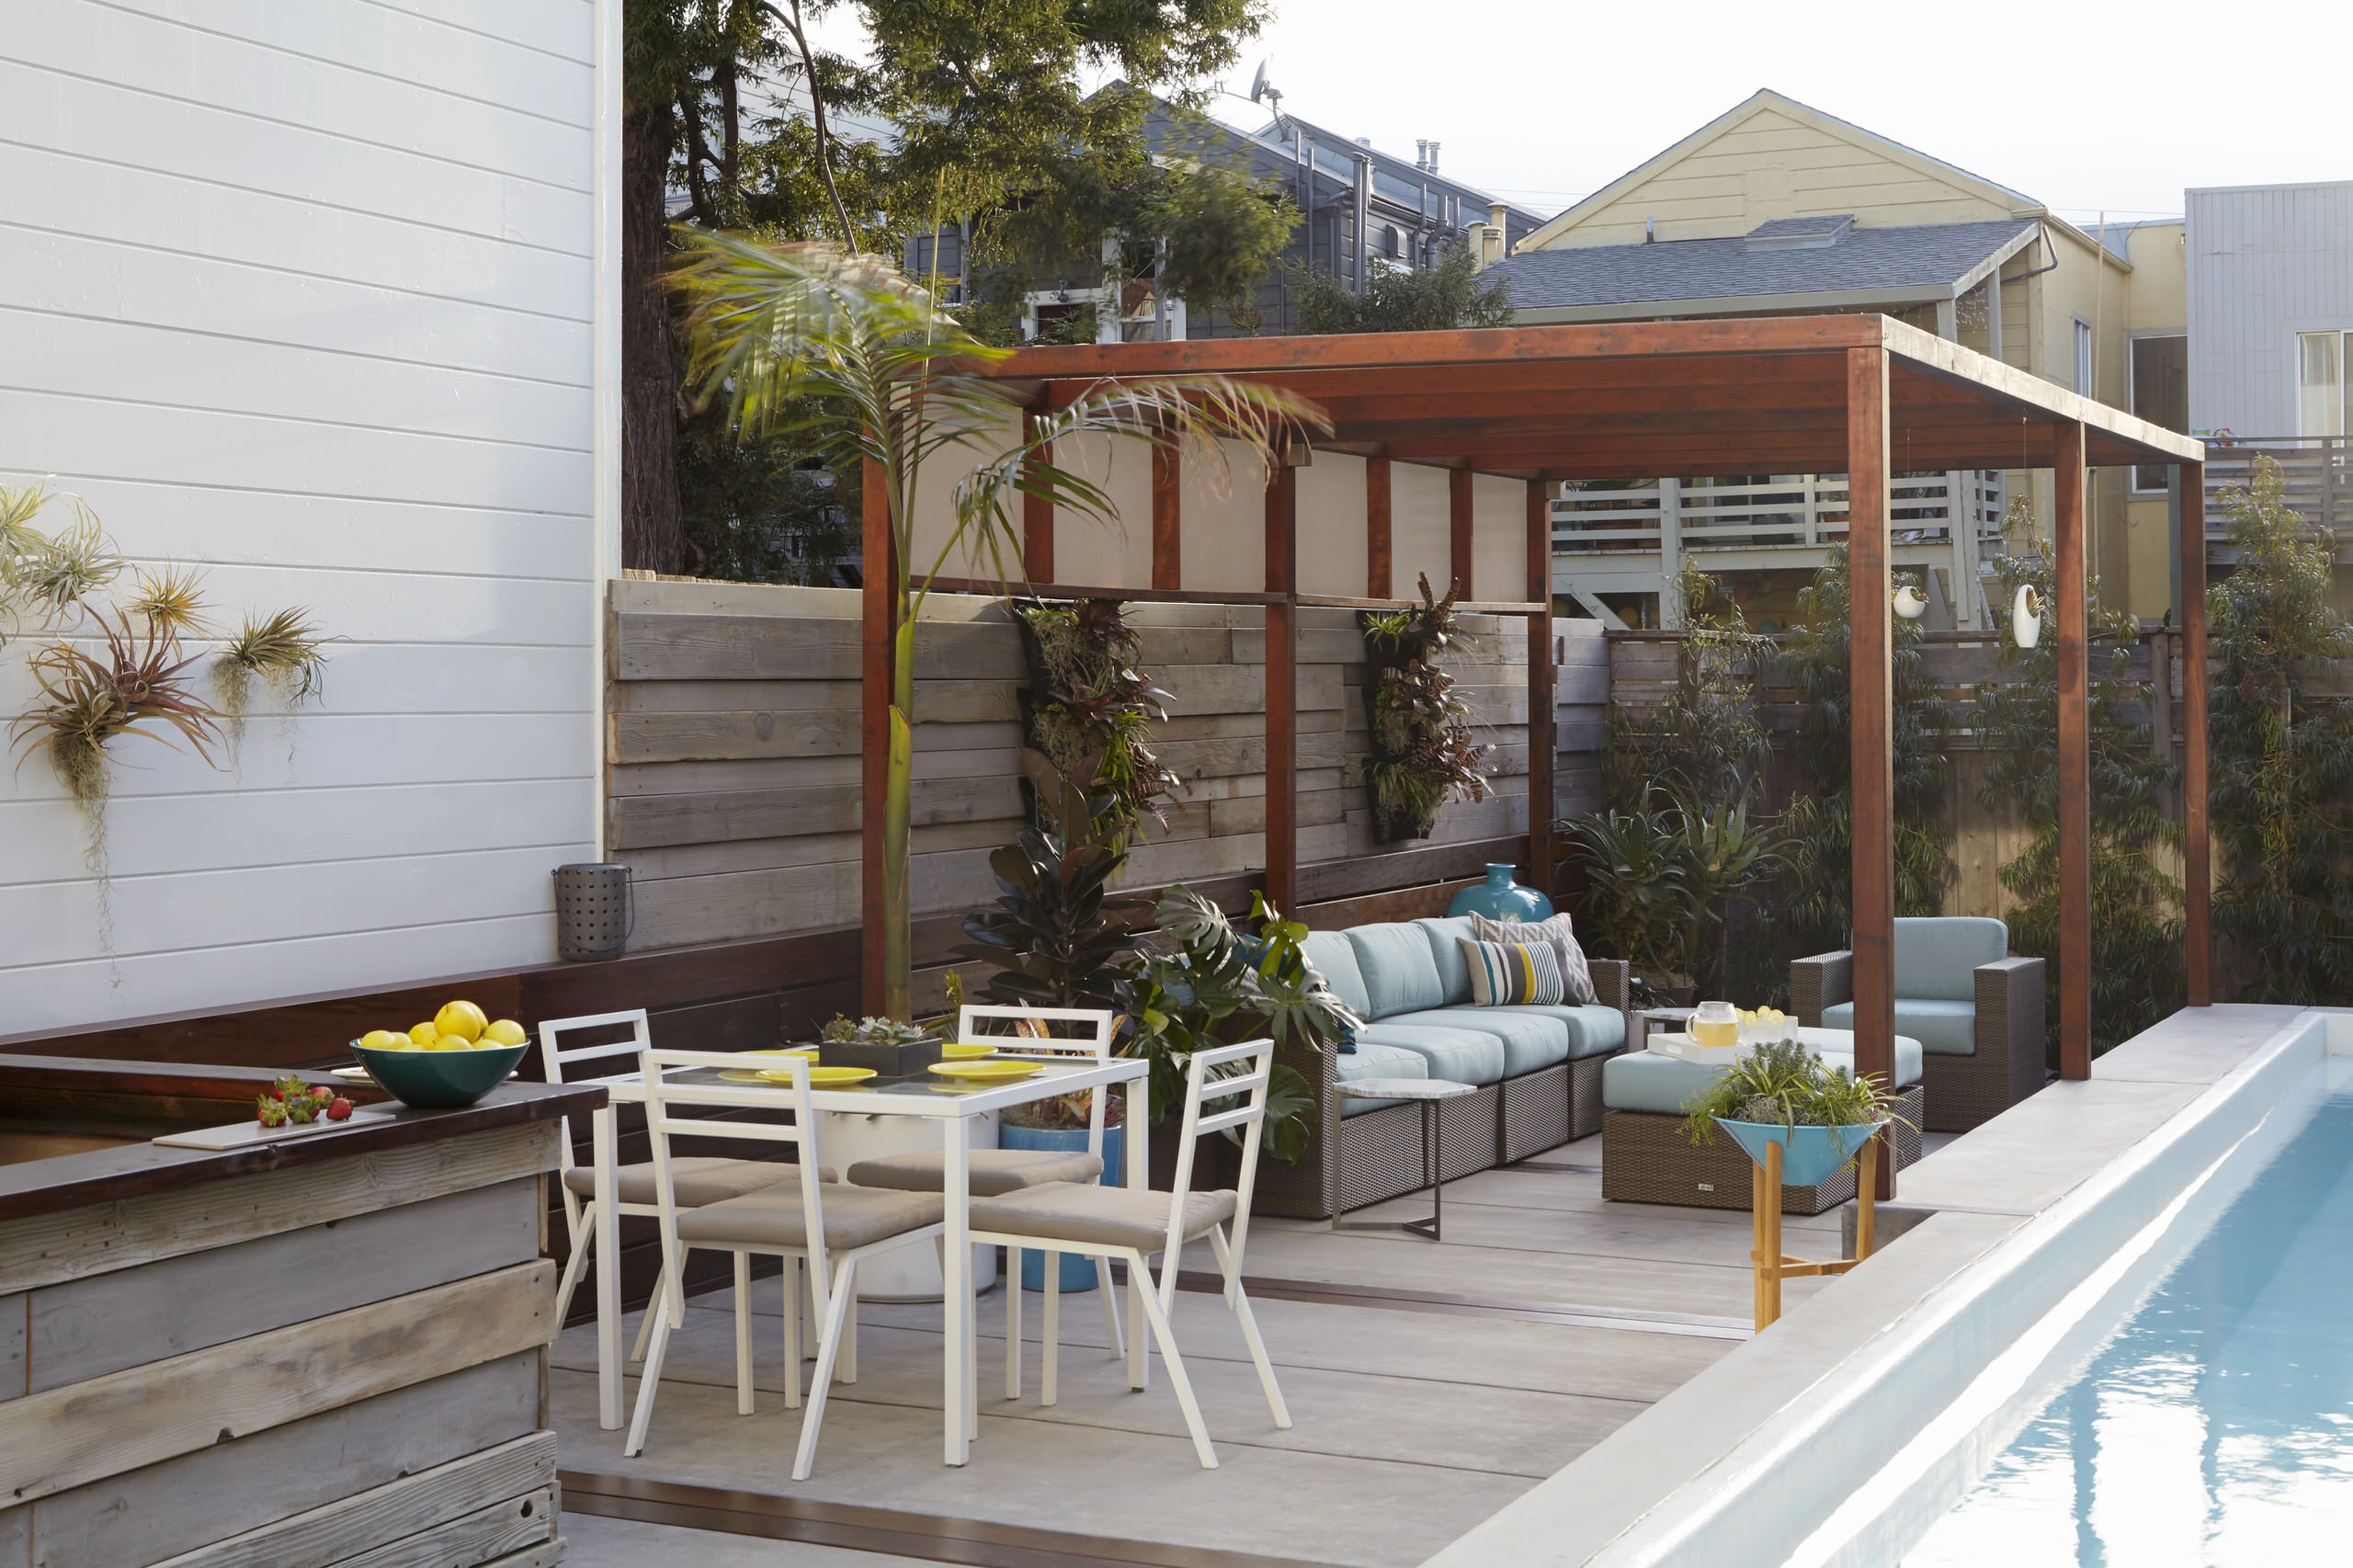 Simple Patio Ideas for Small Space